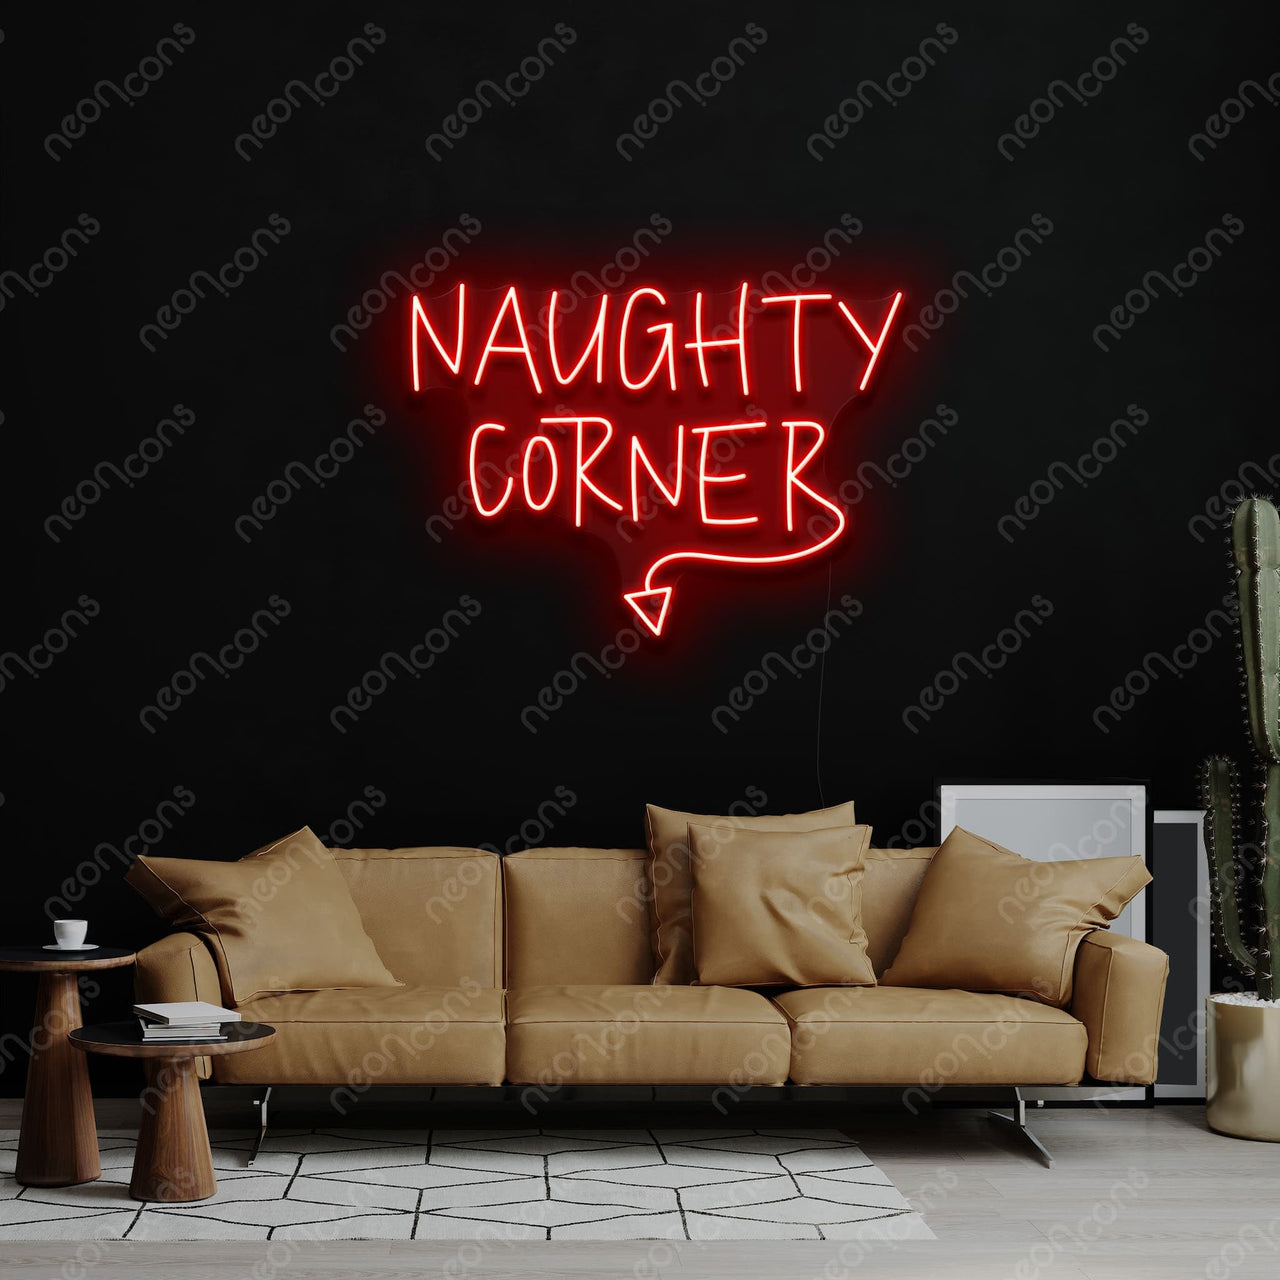 "Naughty Corner" LED Neon Sign by Neon Icons